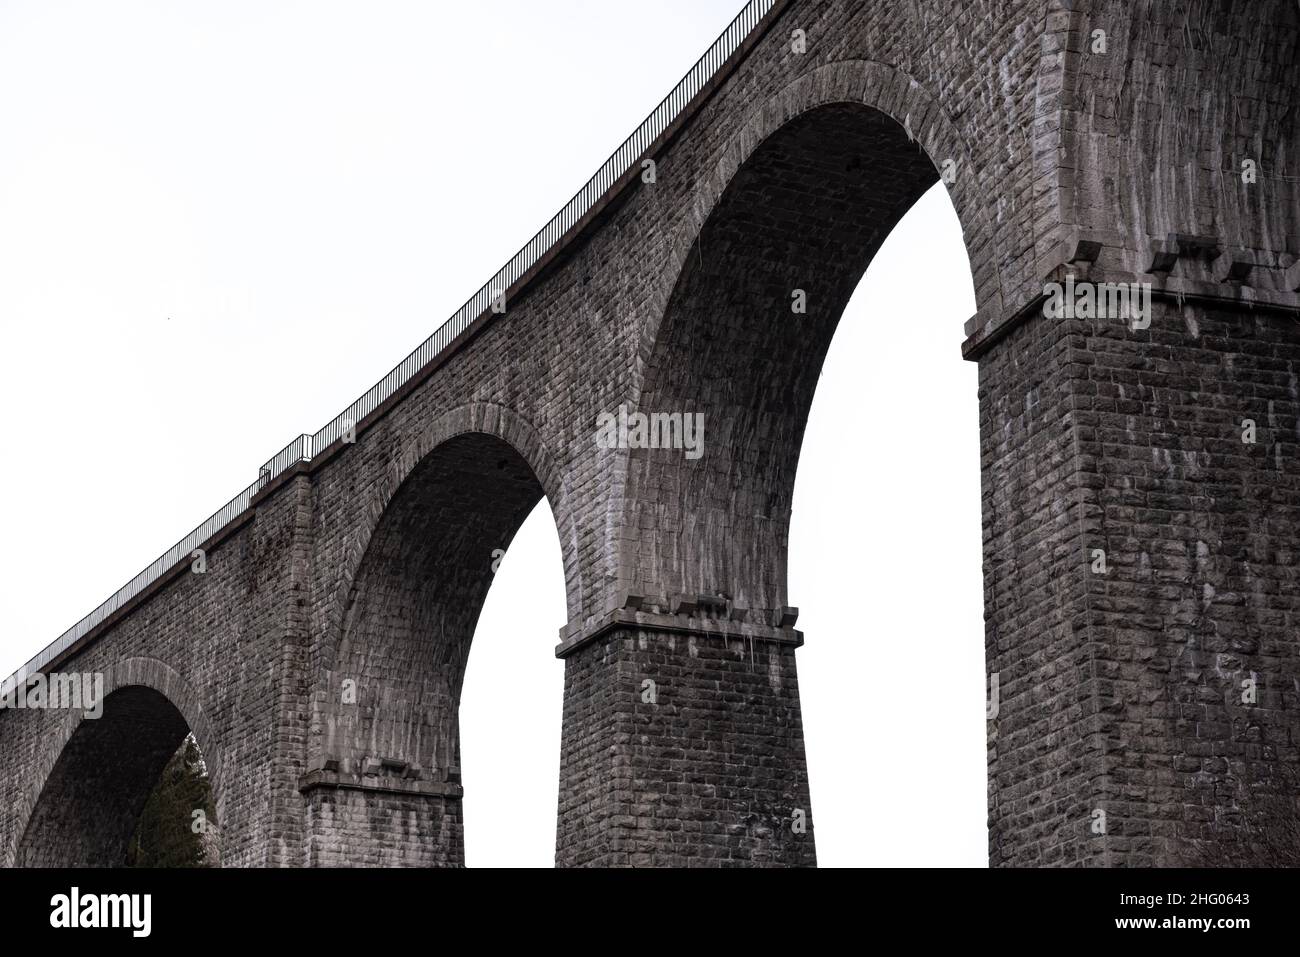 Architectural detail in close-up view from below of arches and columns pillars of stone brick railway bridge against high key lighting sky in Chamonix Stock Photo